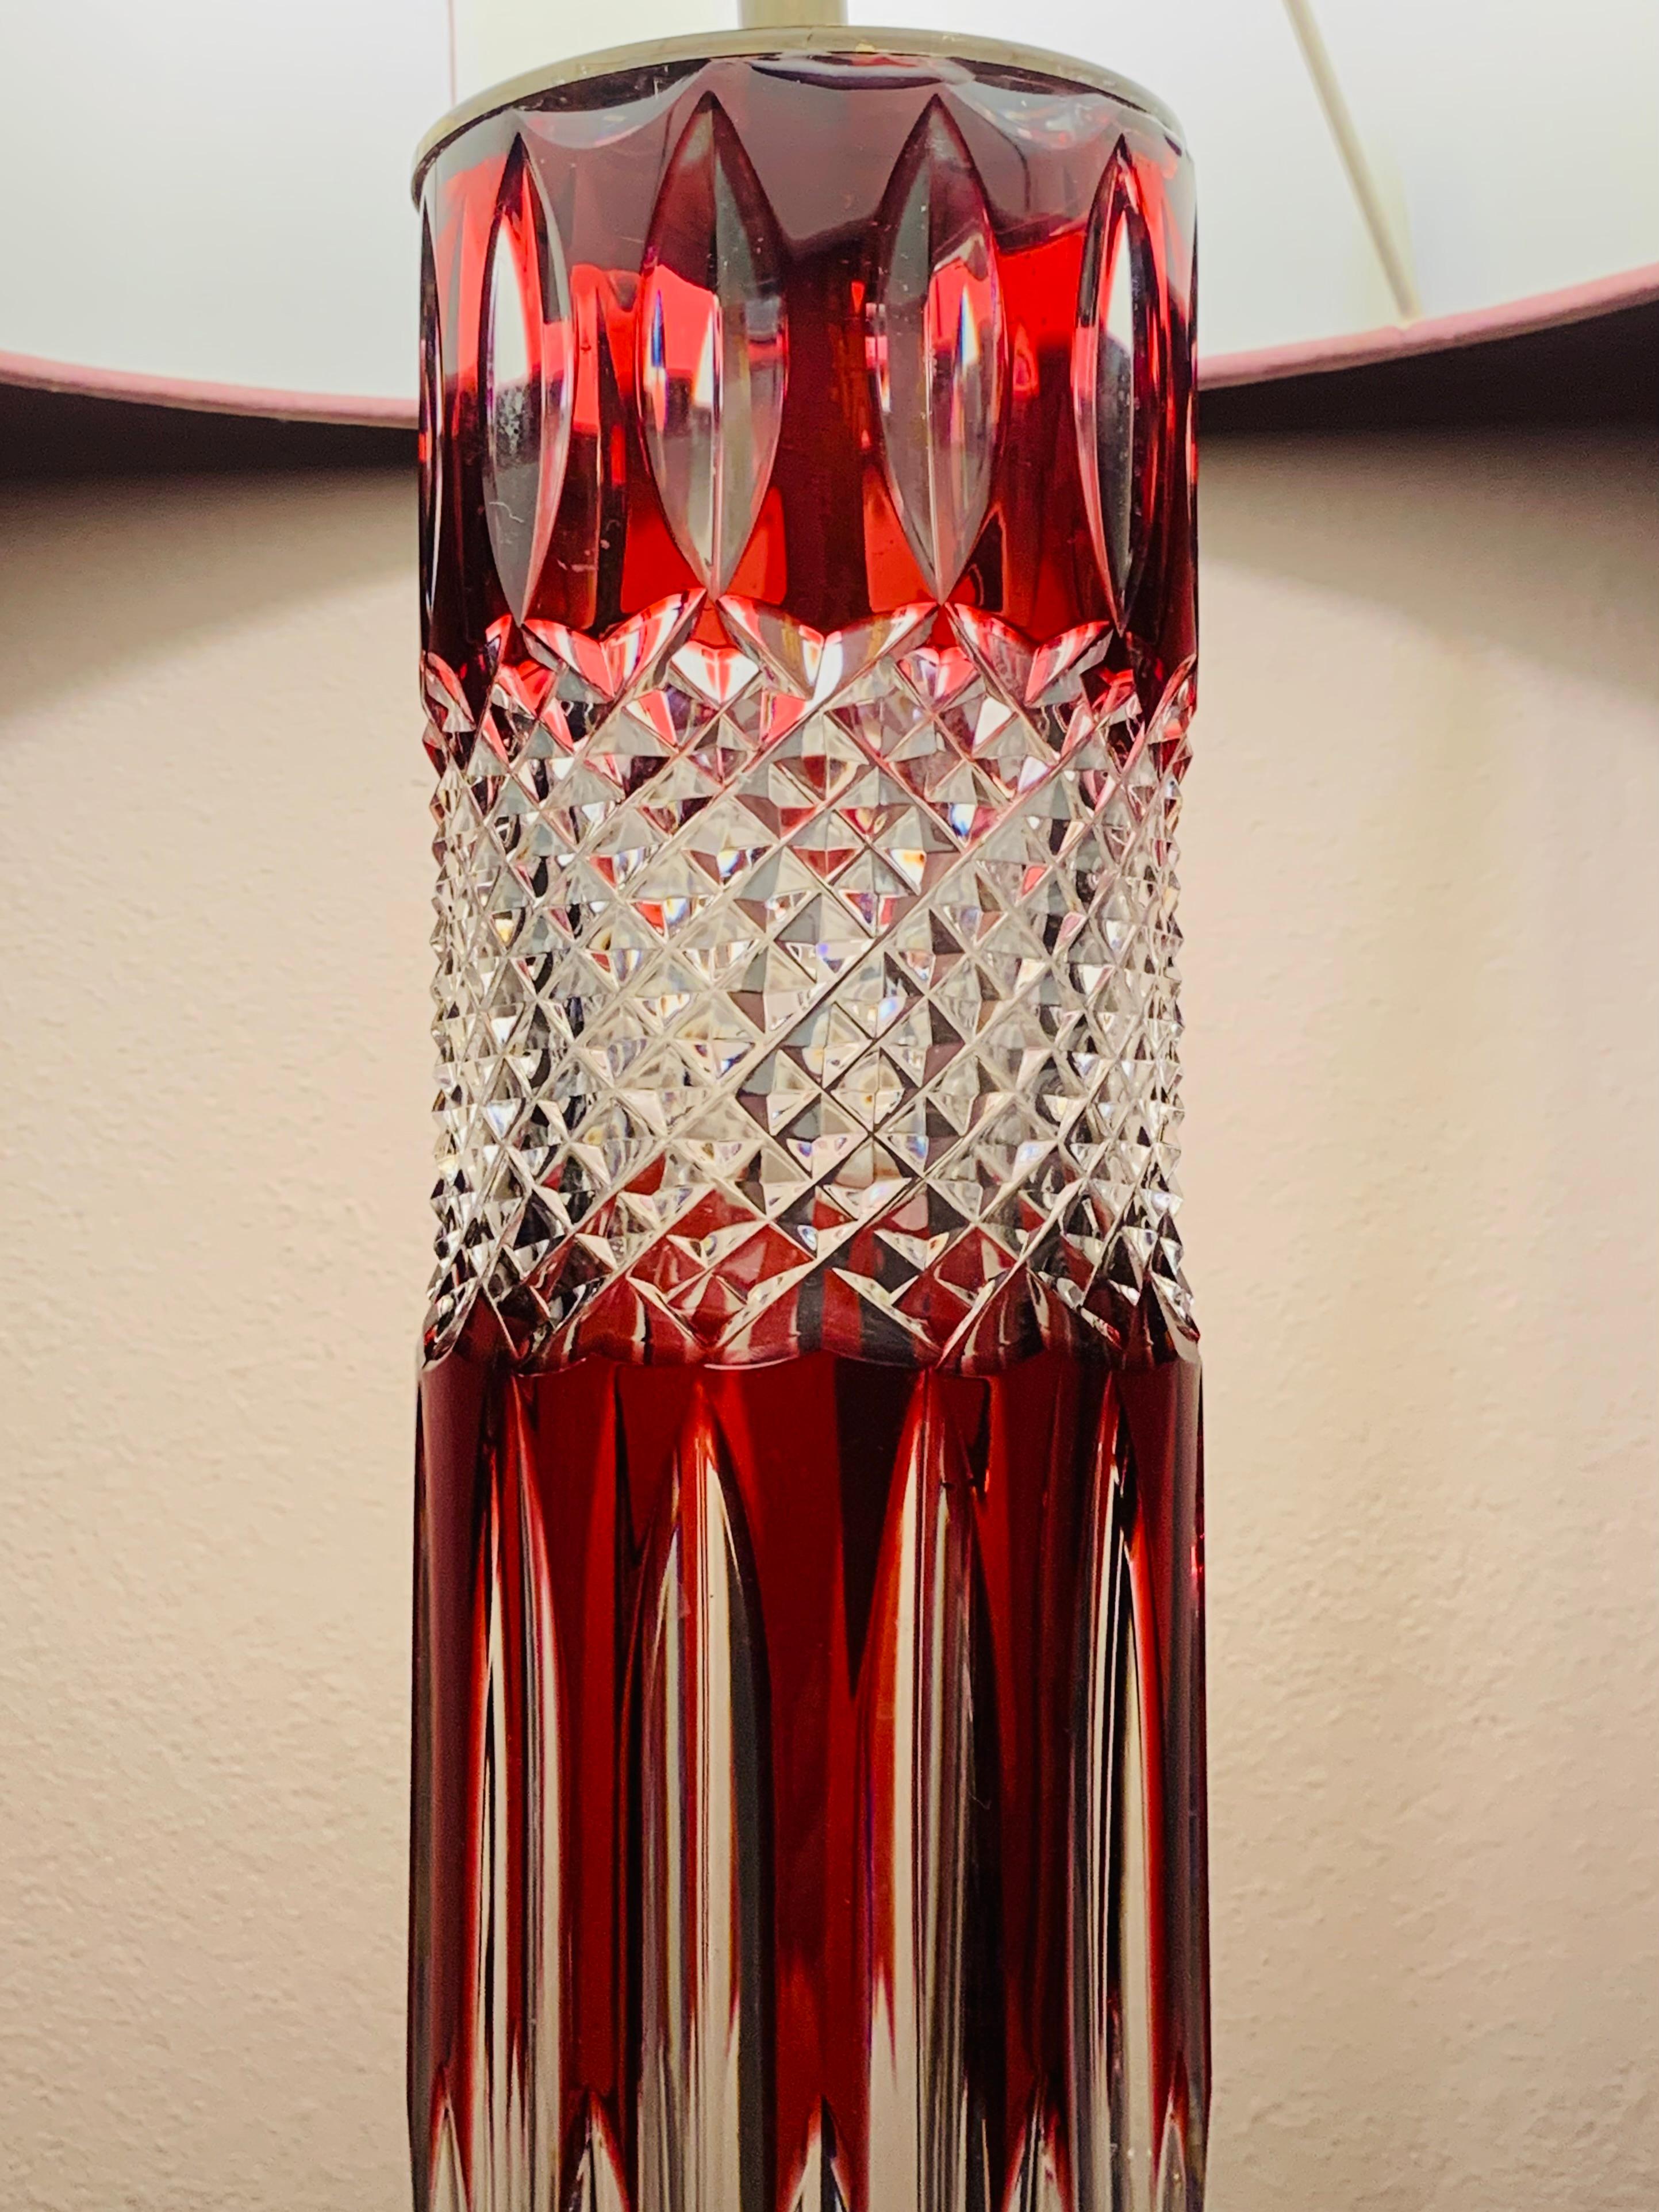 Brass 1950s Val St Lambert Ruby Red &Clear Cut Glass Crystal Table Lamp, Signed 21/100 For Sale